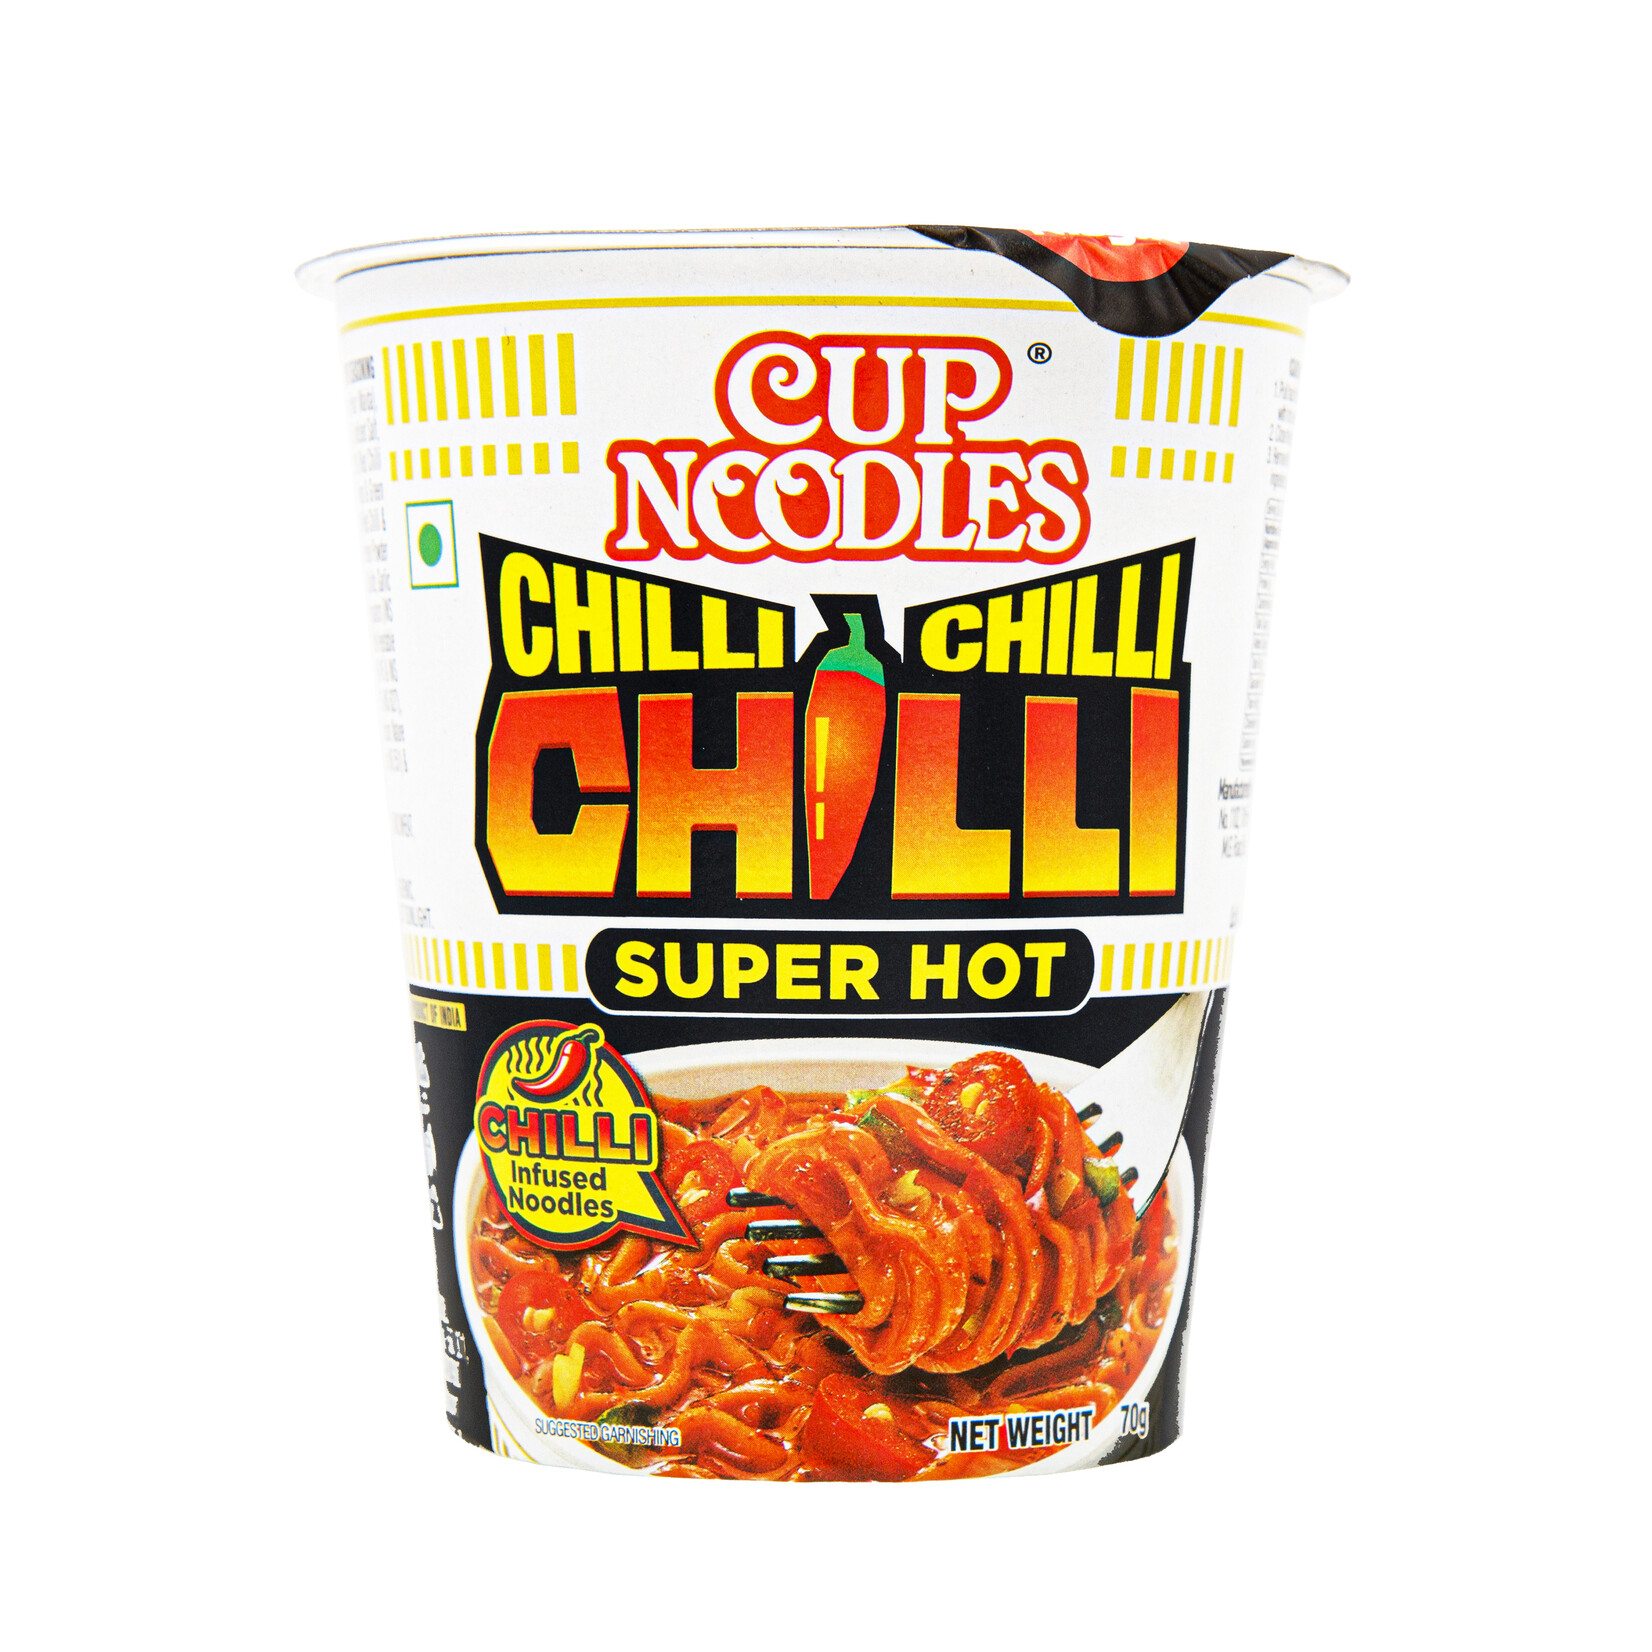 Nissin Cup noodles chili 70g